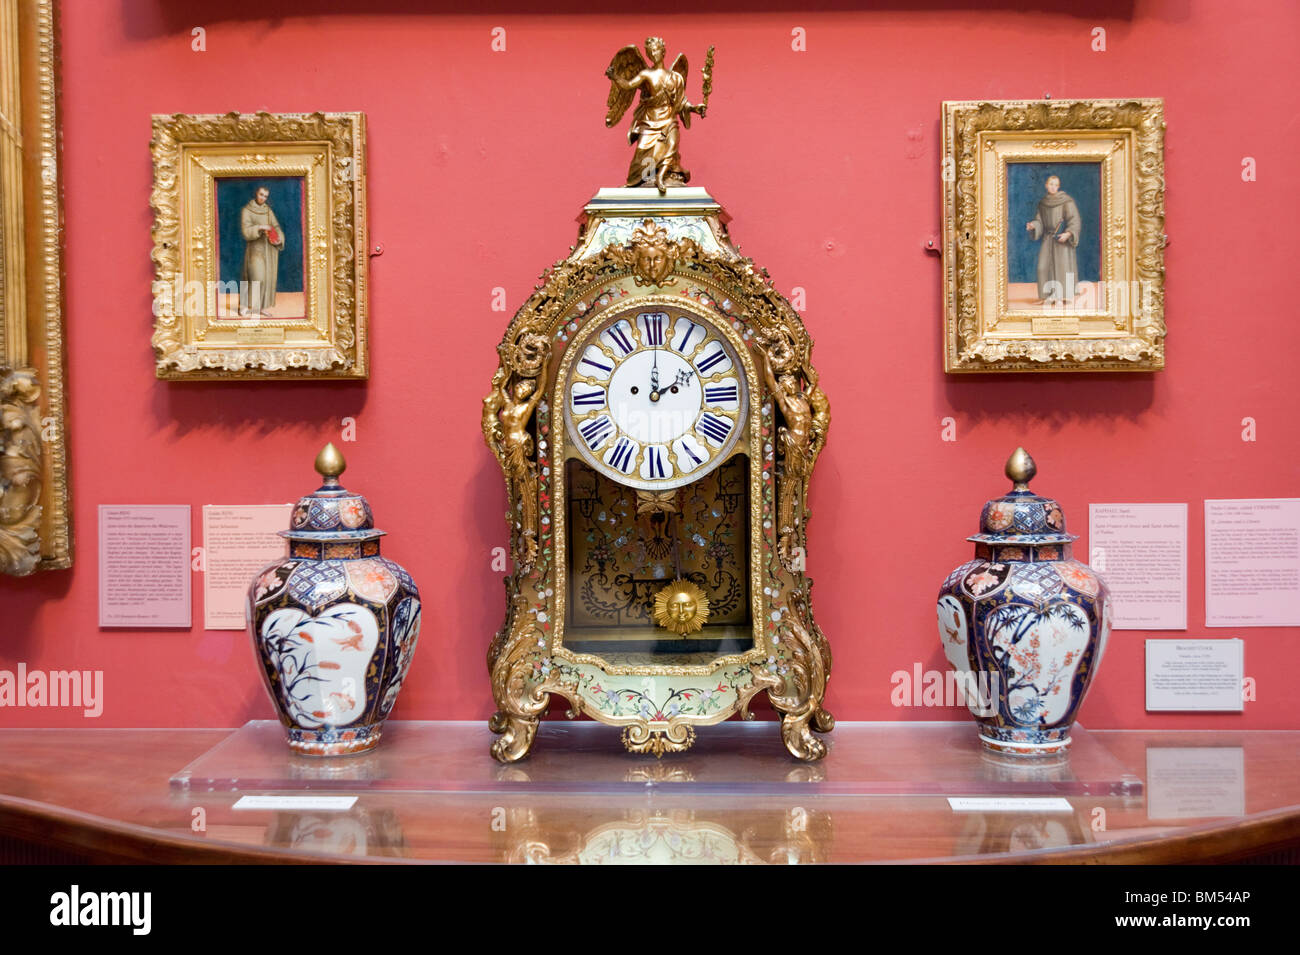 Ornate gold clock in The Dulwich Picture Gallery, London, England, UK Stock Photo